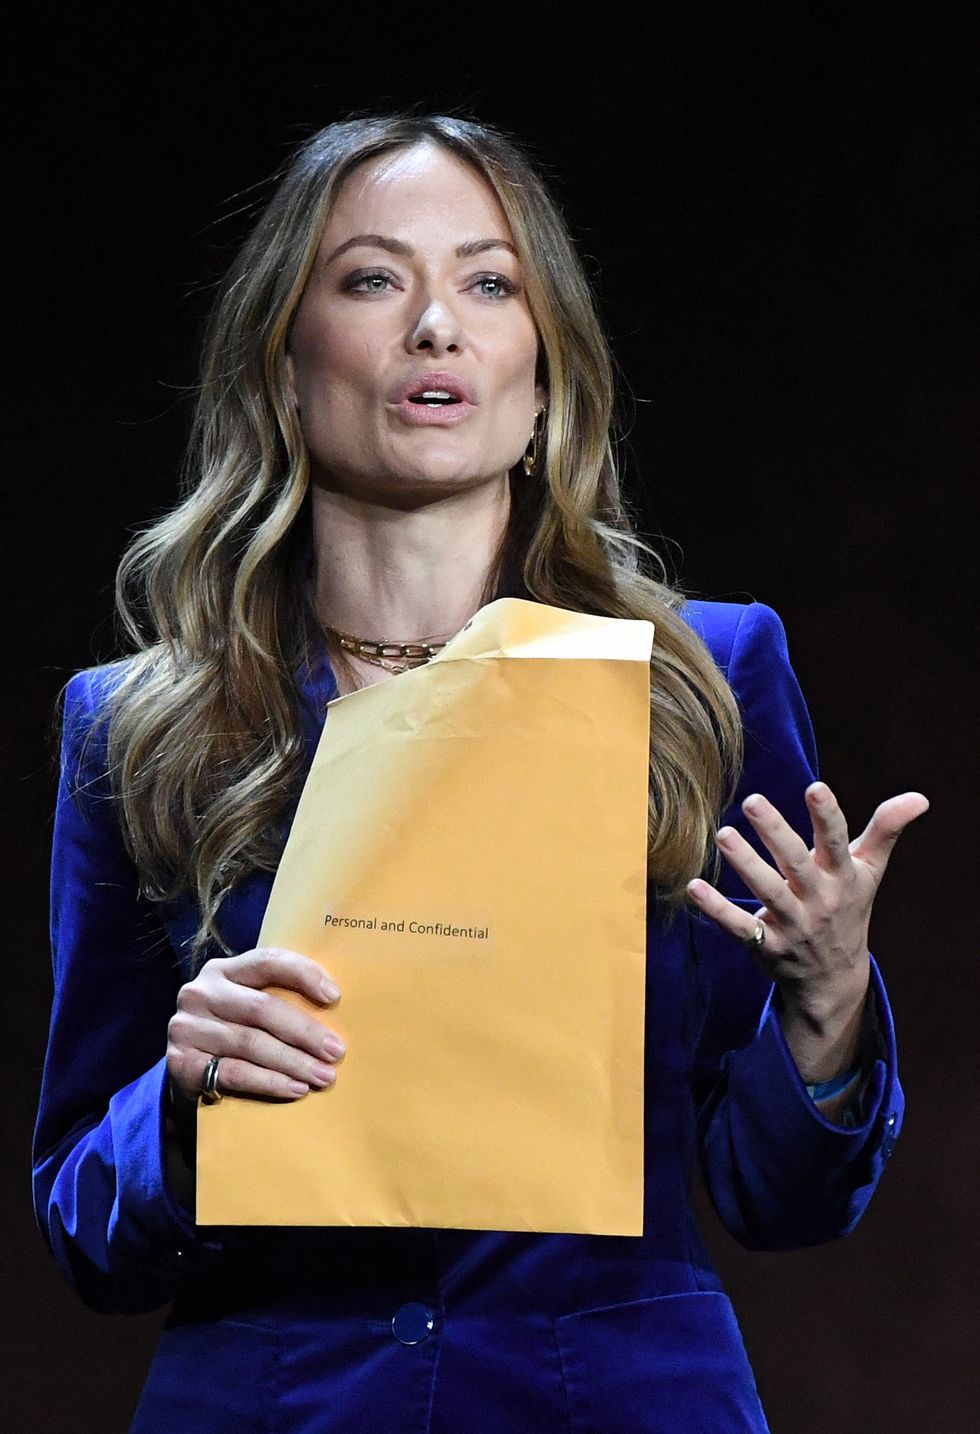 us director and actress olivia wilde holds an envelope reading personal and confidential as she speaks onstage during the warner bros pictures the big picture presentation during cinemacon 2022 at caesars palace in las vegas, nevada on april 26, 2022   when olivia wilde was handed a mysterious envelope on stage midway through her presentation before a packed las vegas audience, many assumed it was the set up for an elaborate joke
instead, she was getting served legal papers from her ex partner jason sudeikis
this is for me, right asked wilde, interrupted while introducing footage from her upcoming thriller dont worry darling during warner bros presentation at cinemacon, the annual movie theater industry gathering photo by valerie macon  afp photo by valerie maconafp via getty images